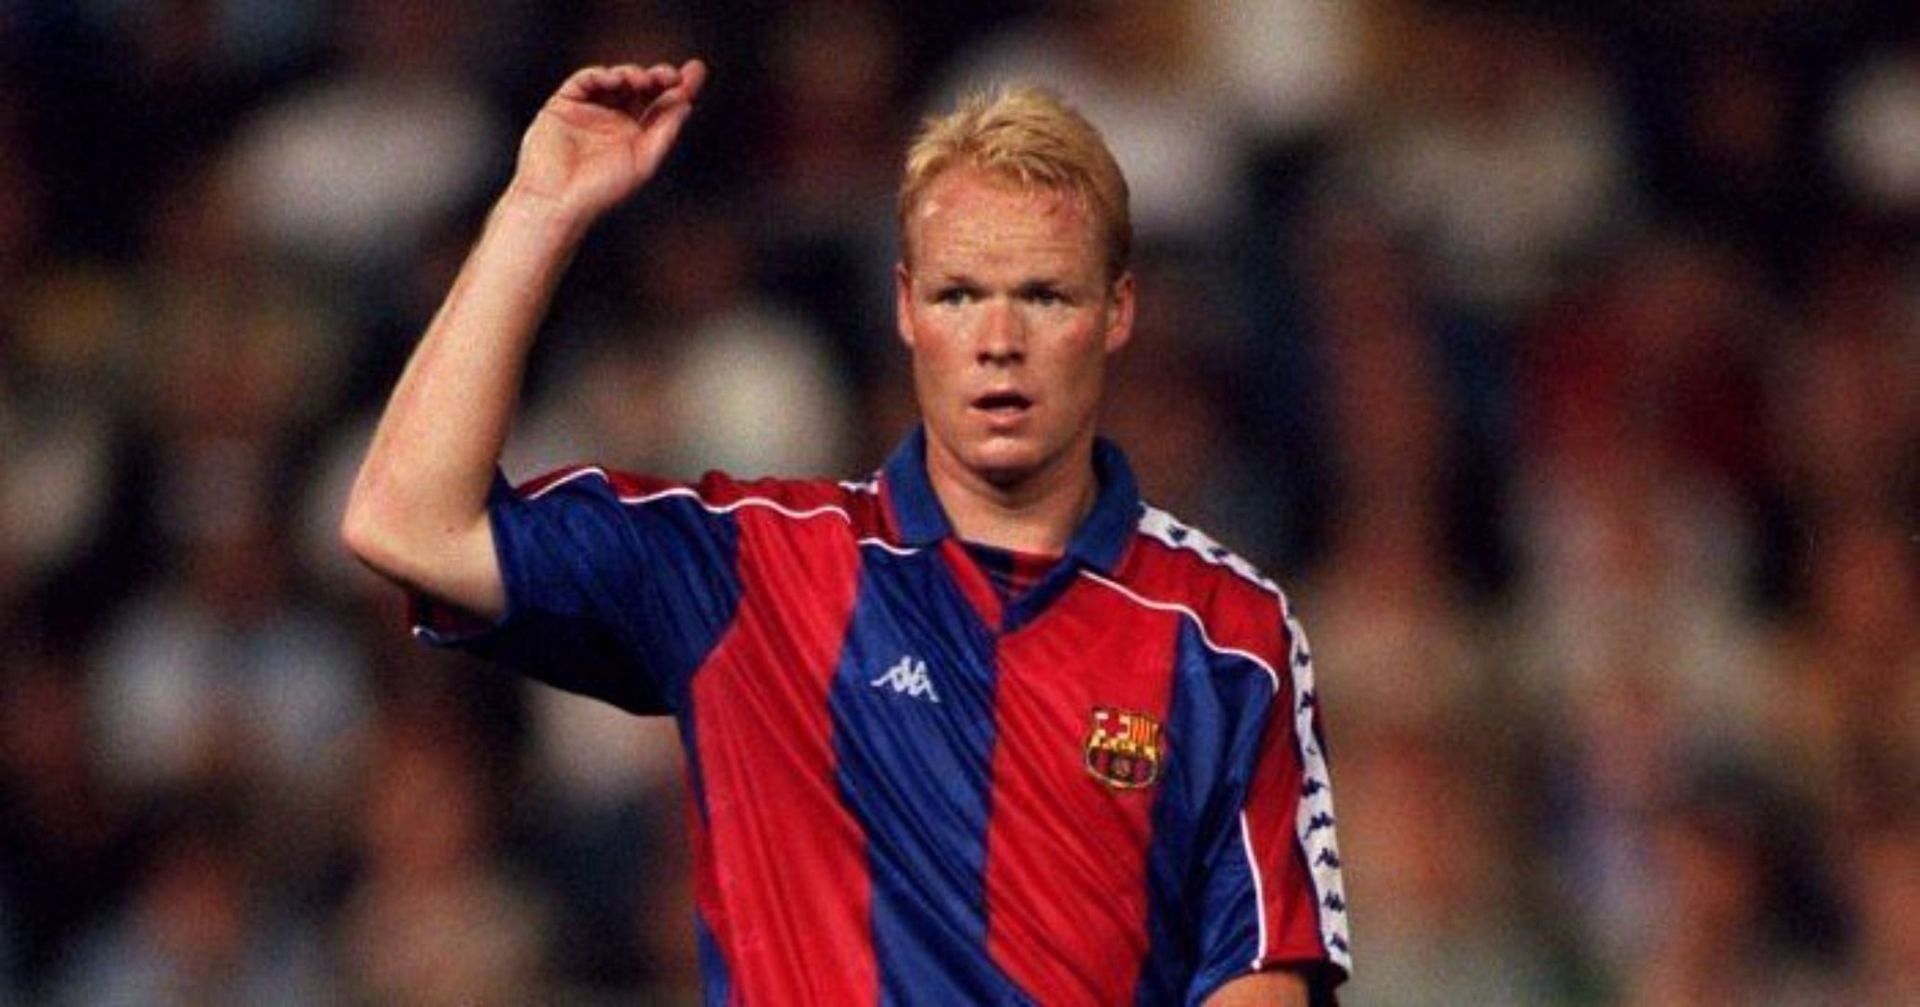 Koeman was a driving force for Barcelona in his playing days.